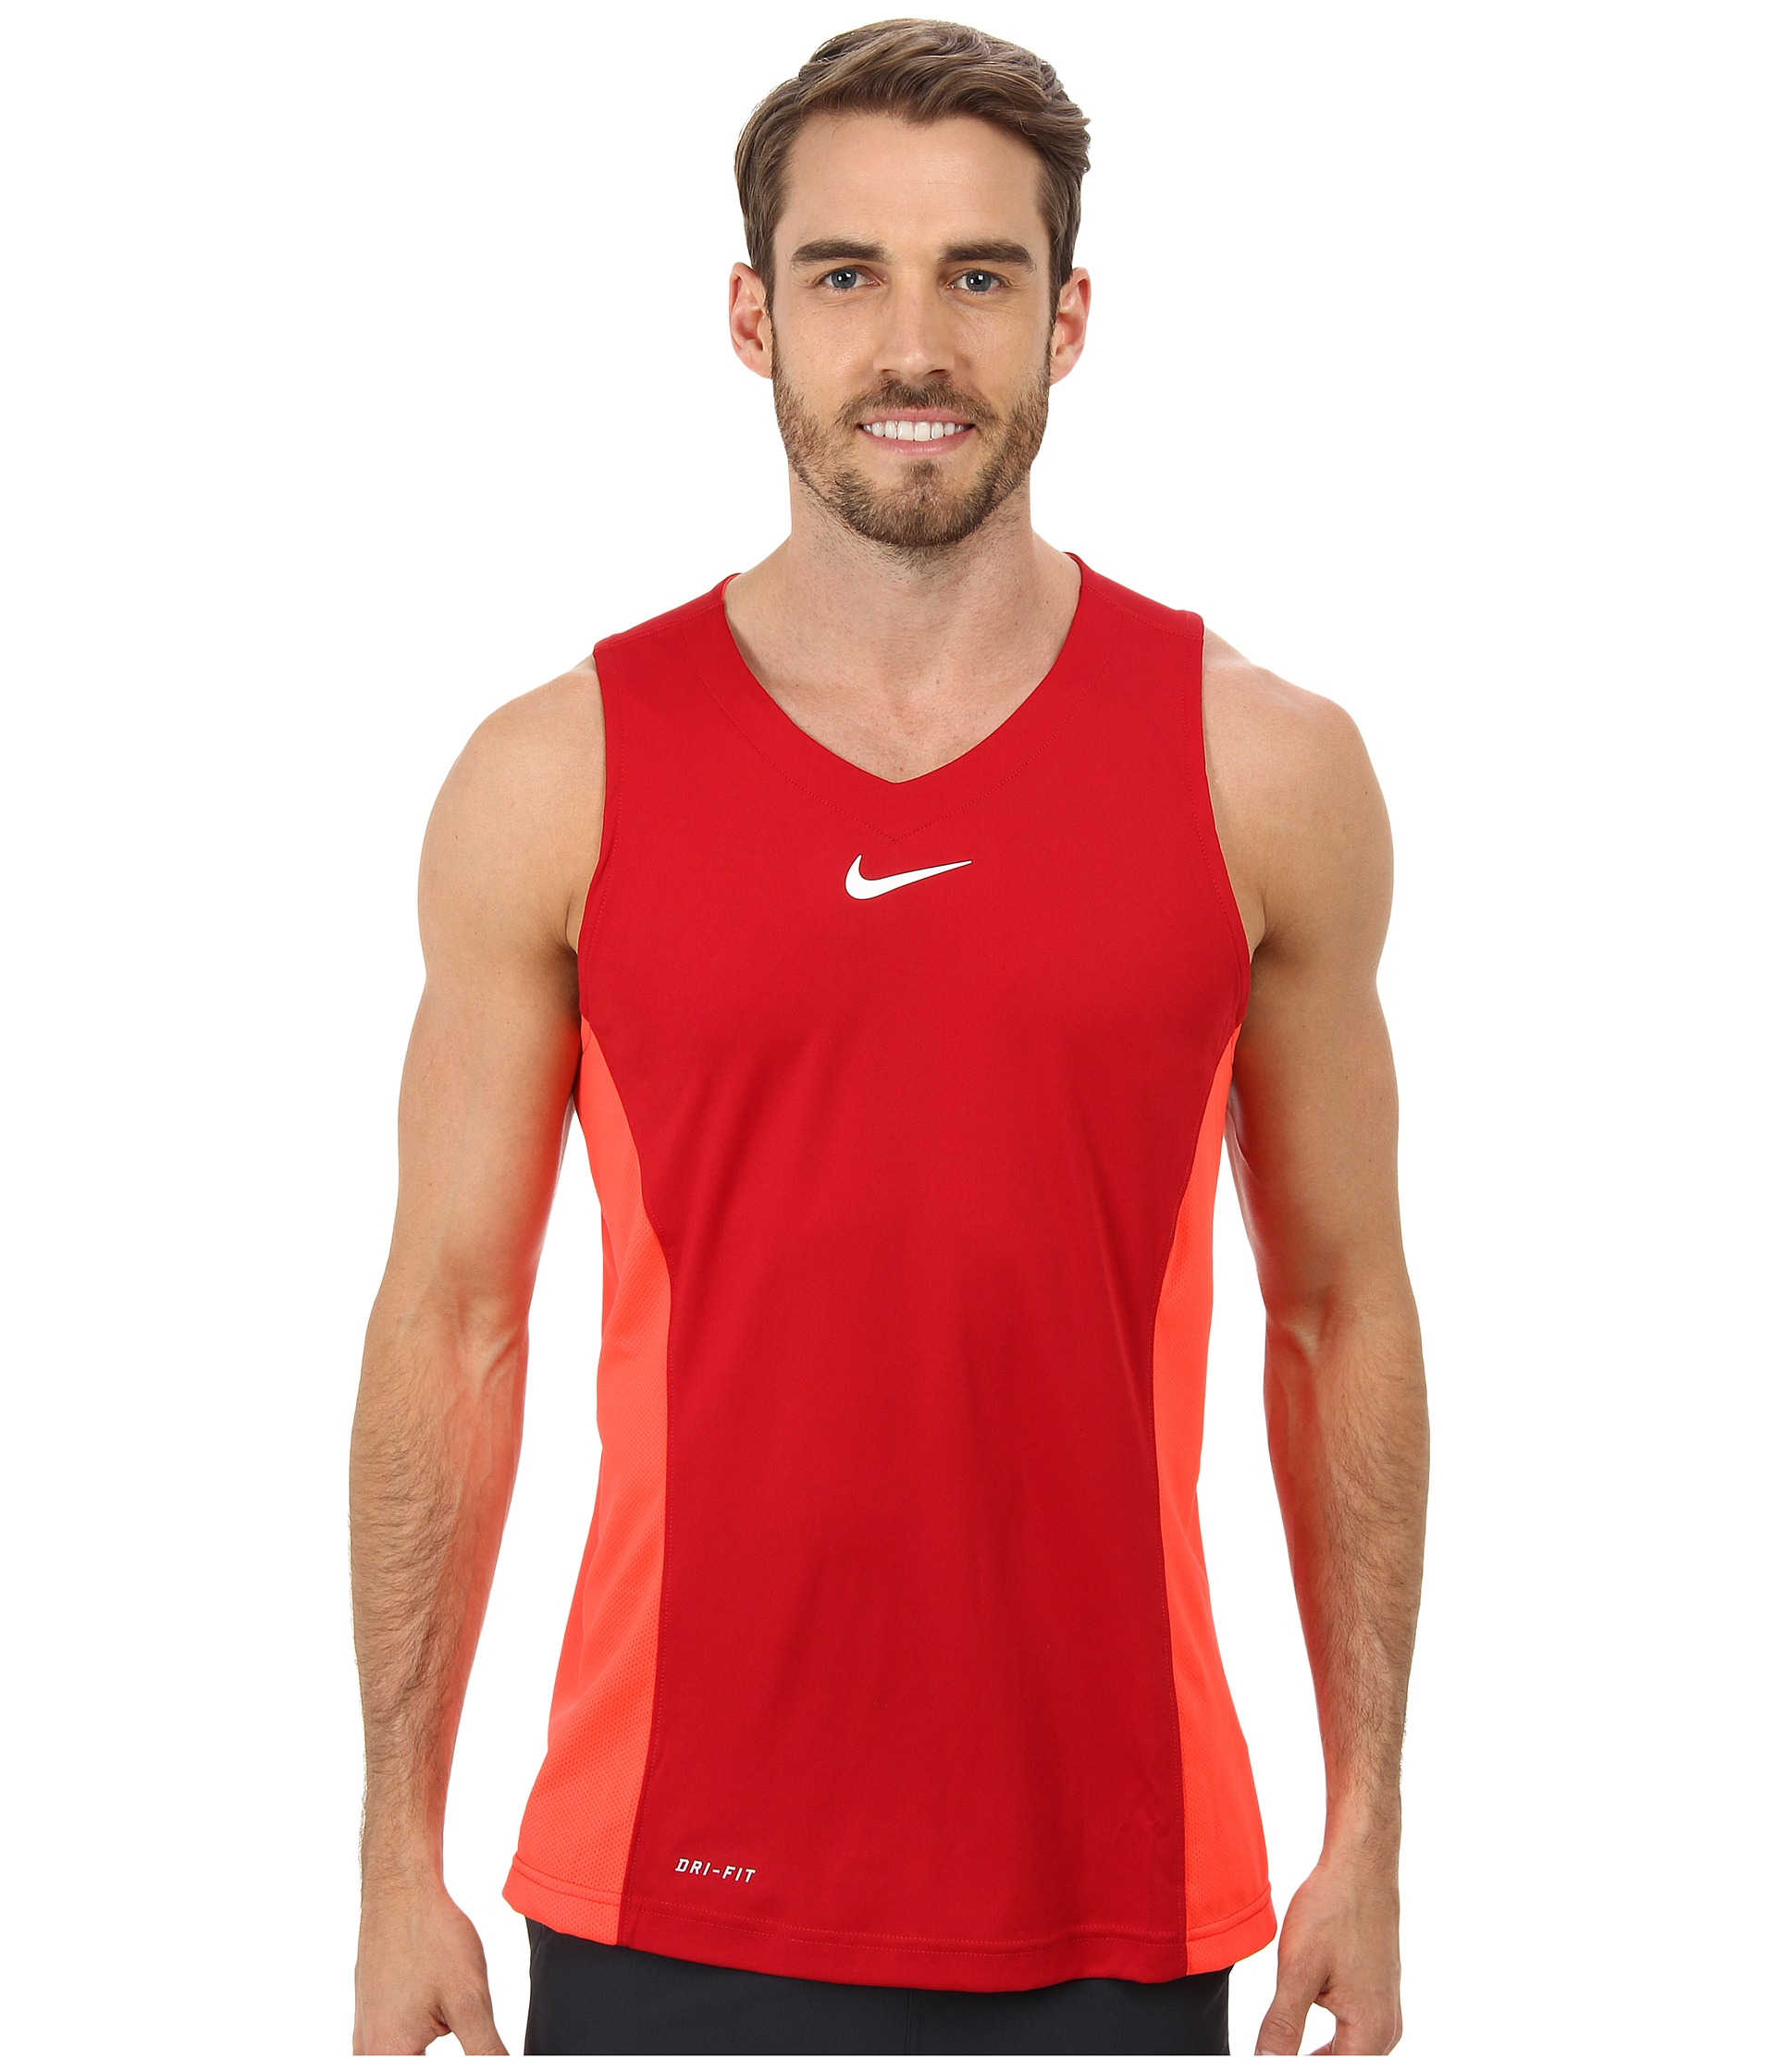 Lyst - Nike Title Hybrid Tank Top in Red for Men